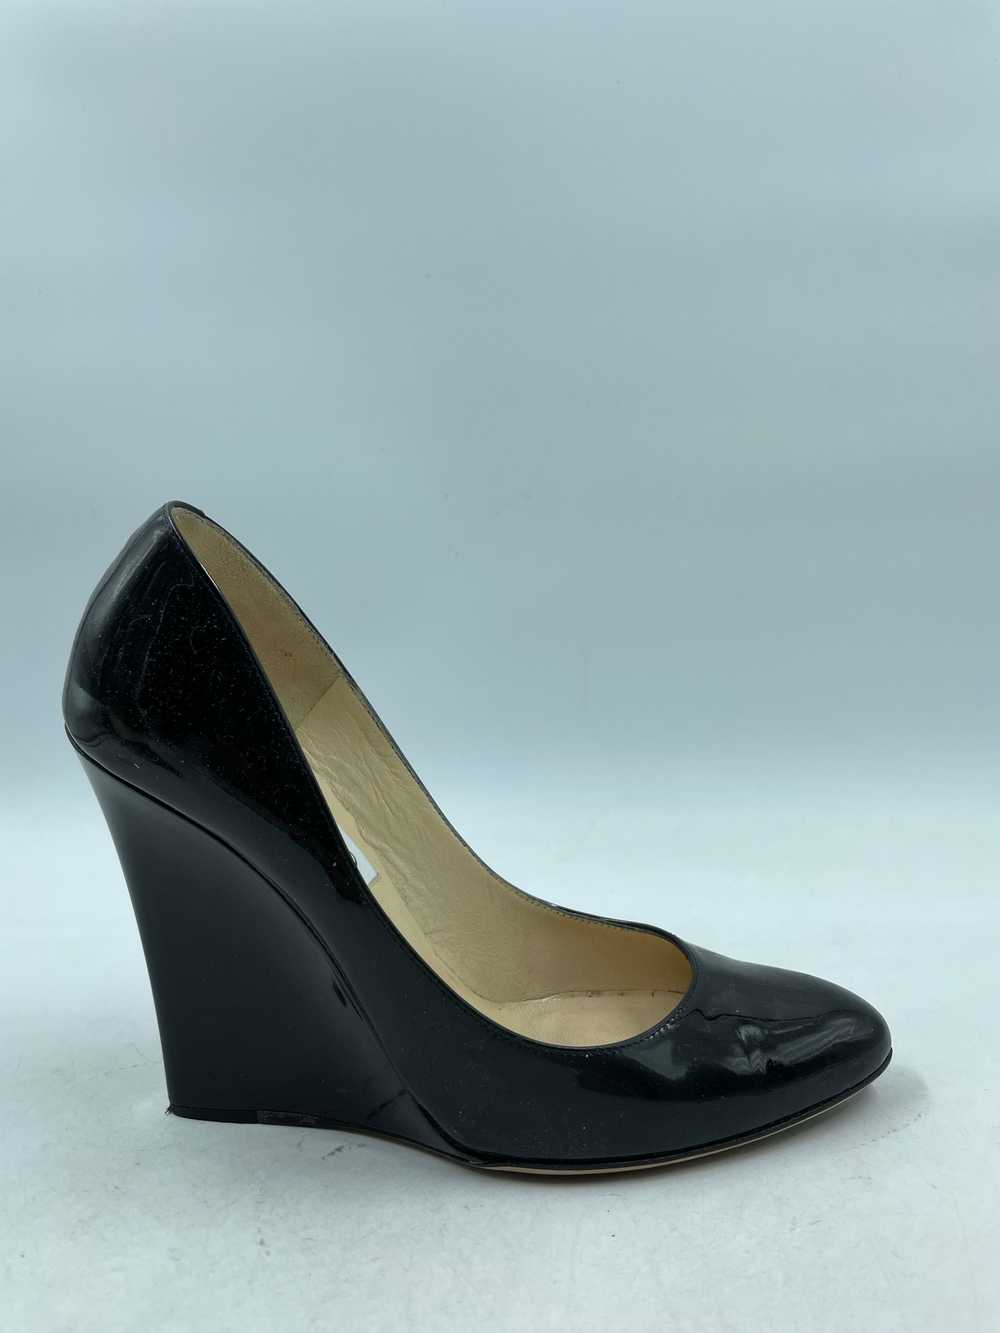 Authentic Jimmy Choo Black Patent Wedge Pumps W 7 - image 1